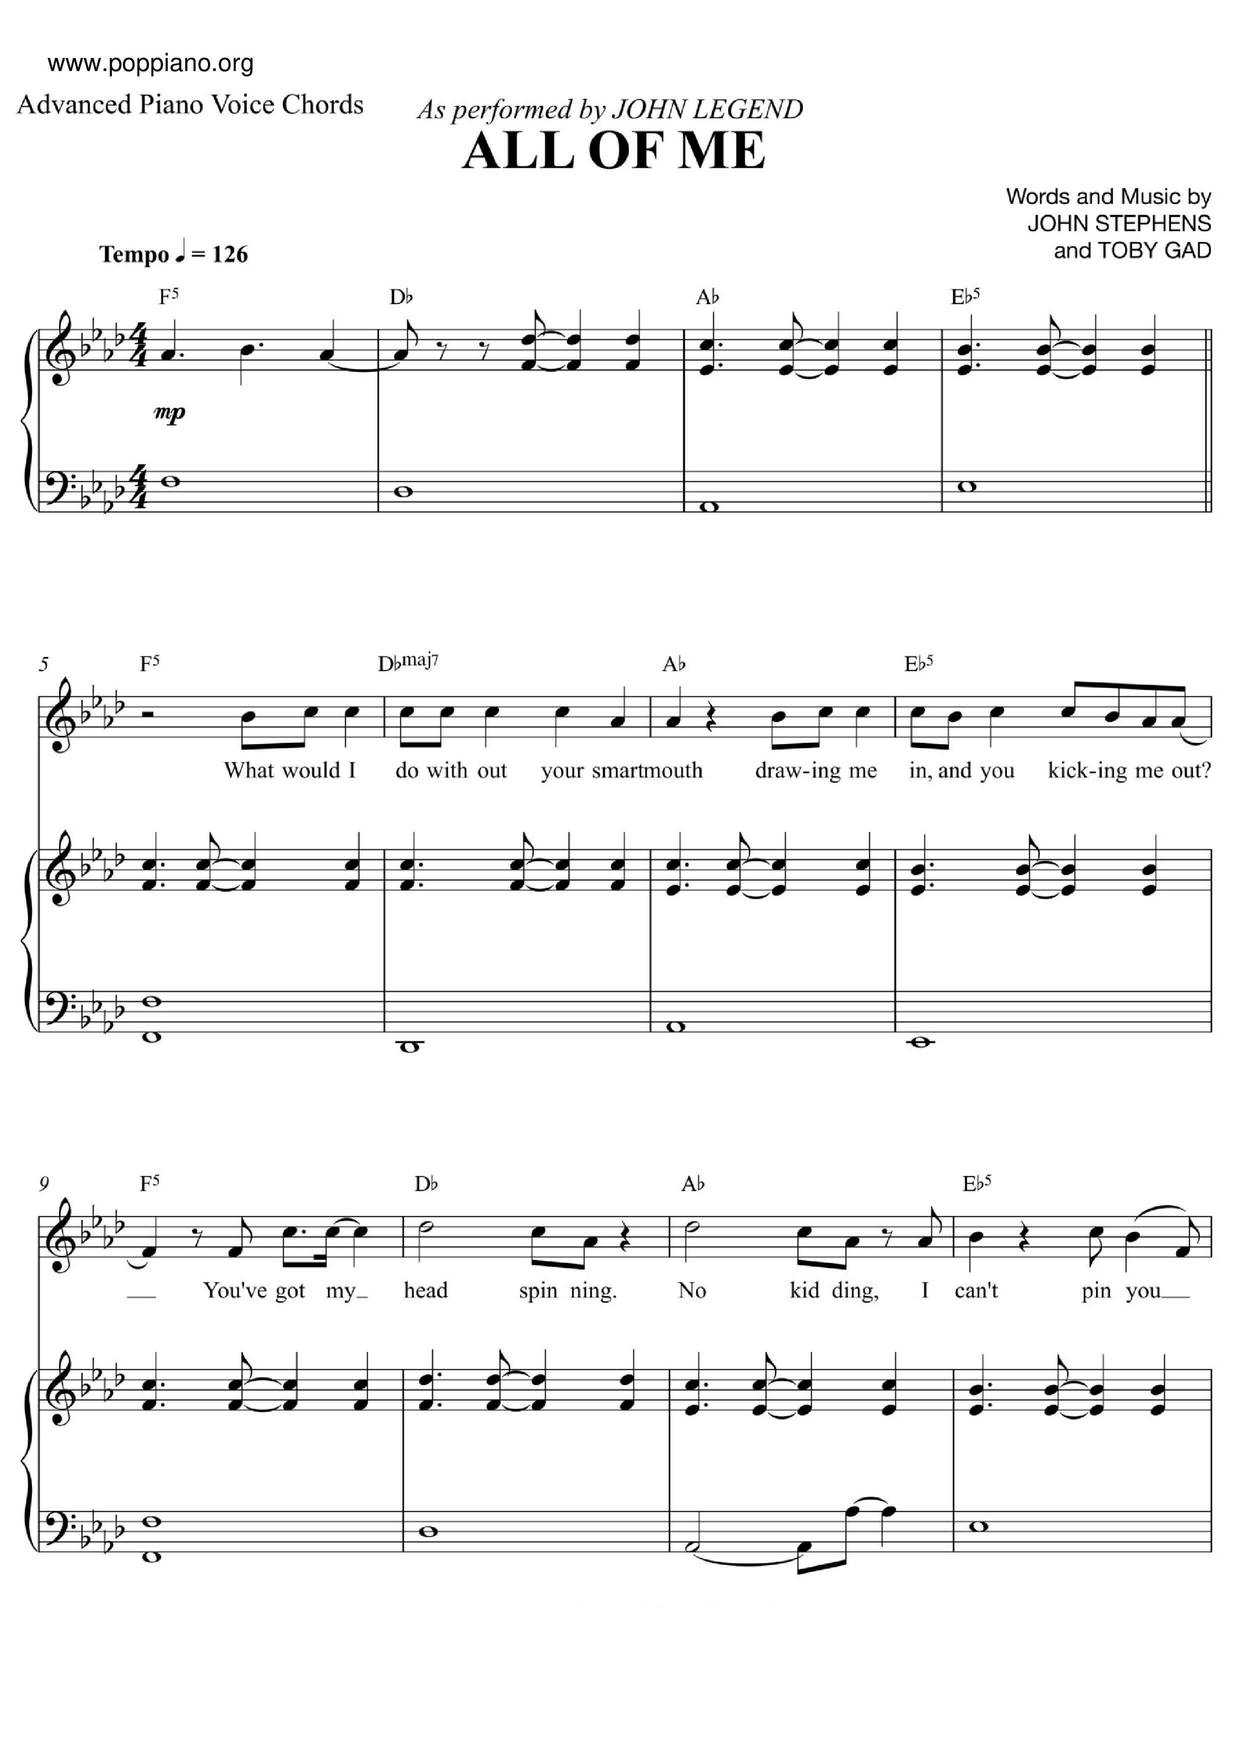 All Of Me Piano Sheet Music Free Pdf : All Of Me Free Sheet Music By